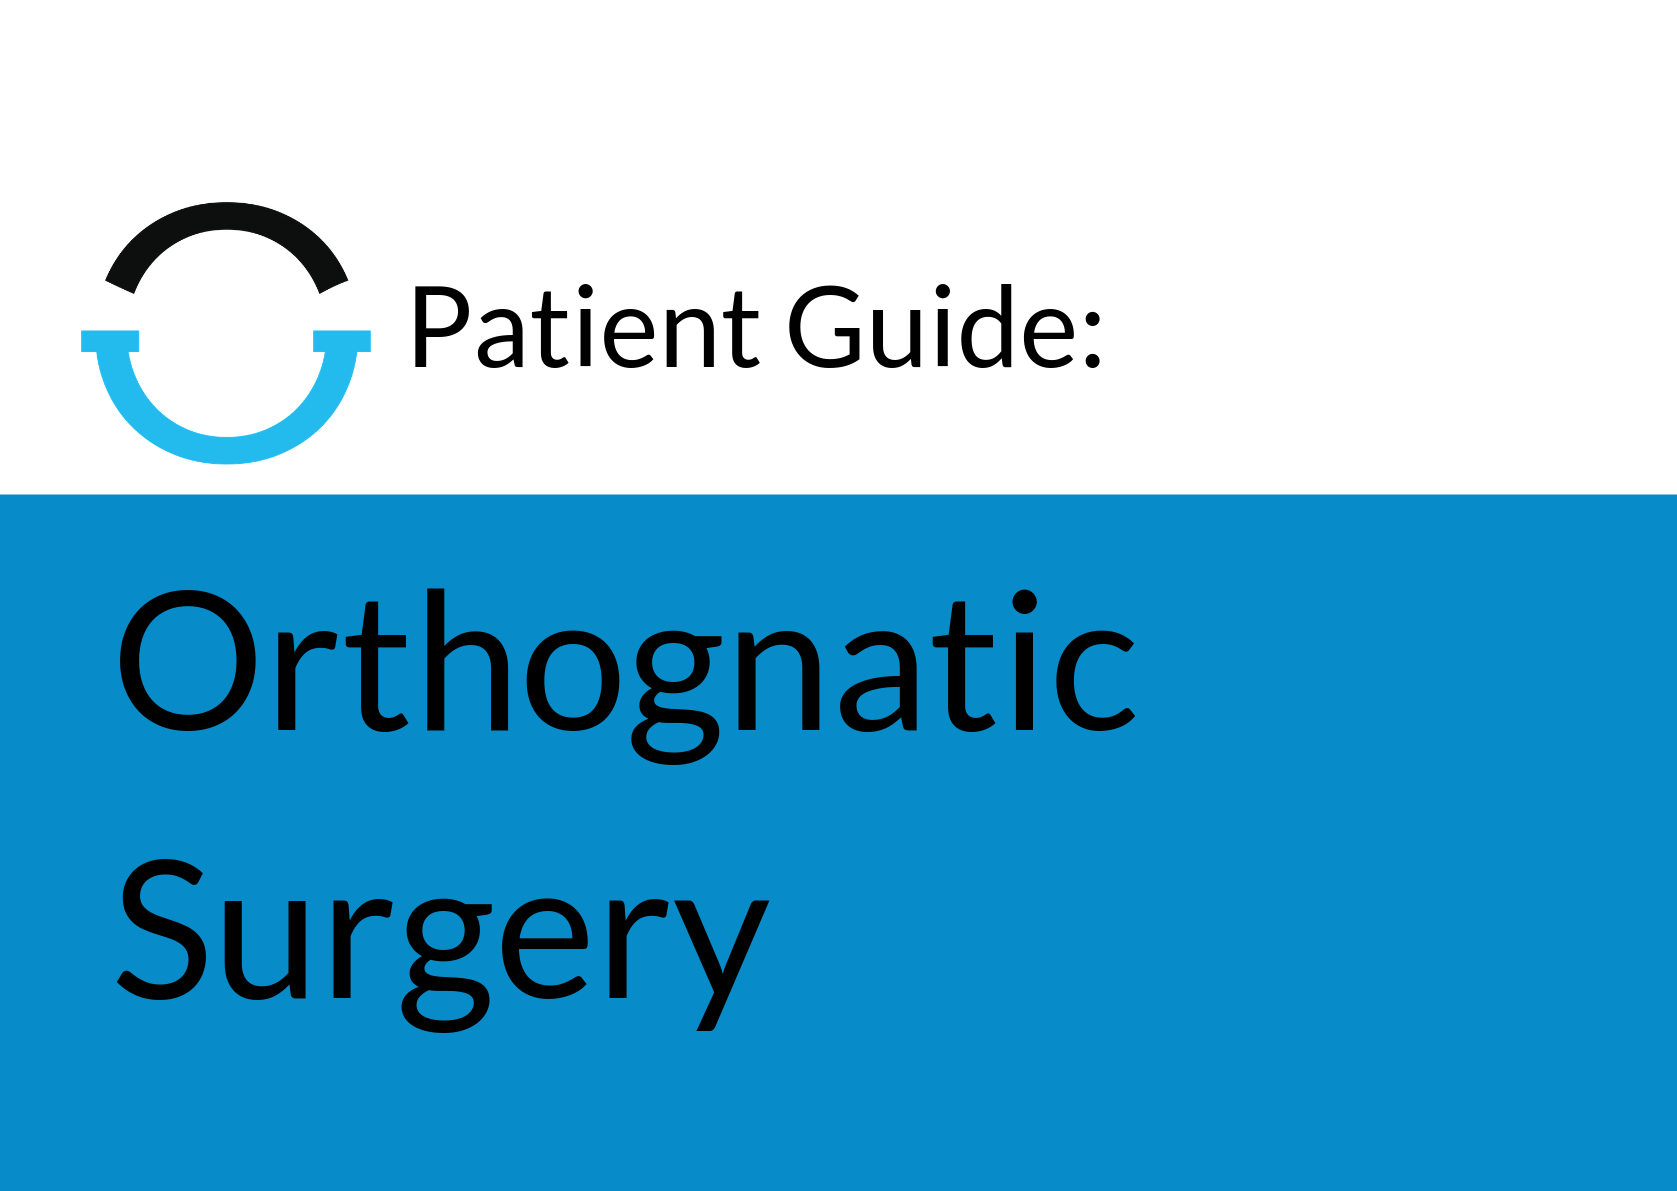 Patient Guide Header Image – Orthognatic Surgery LARGE